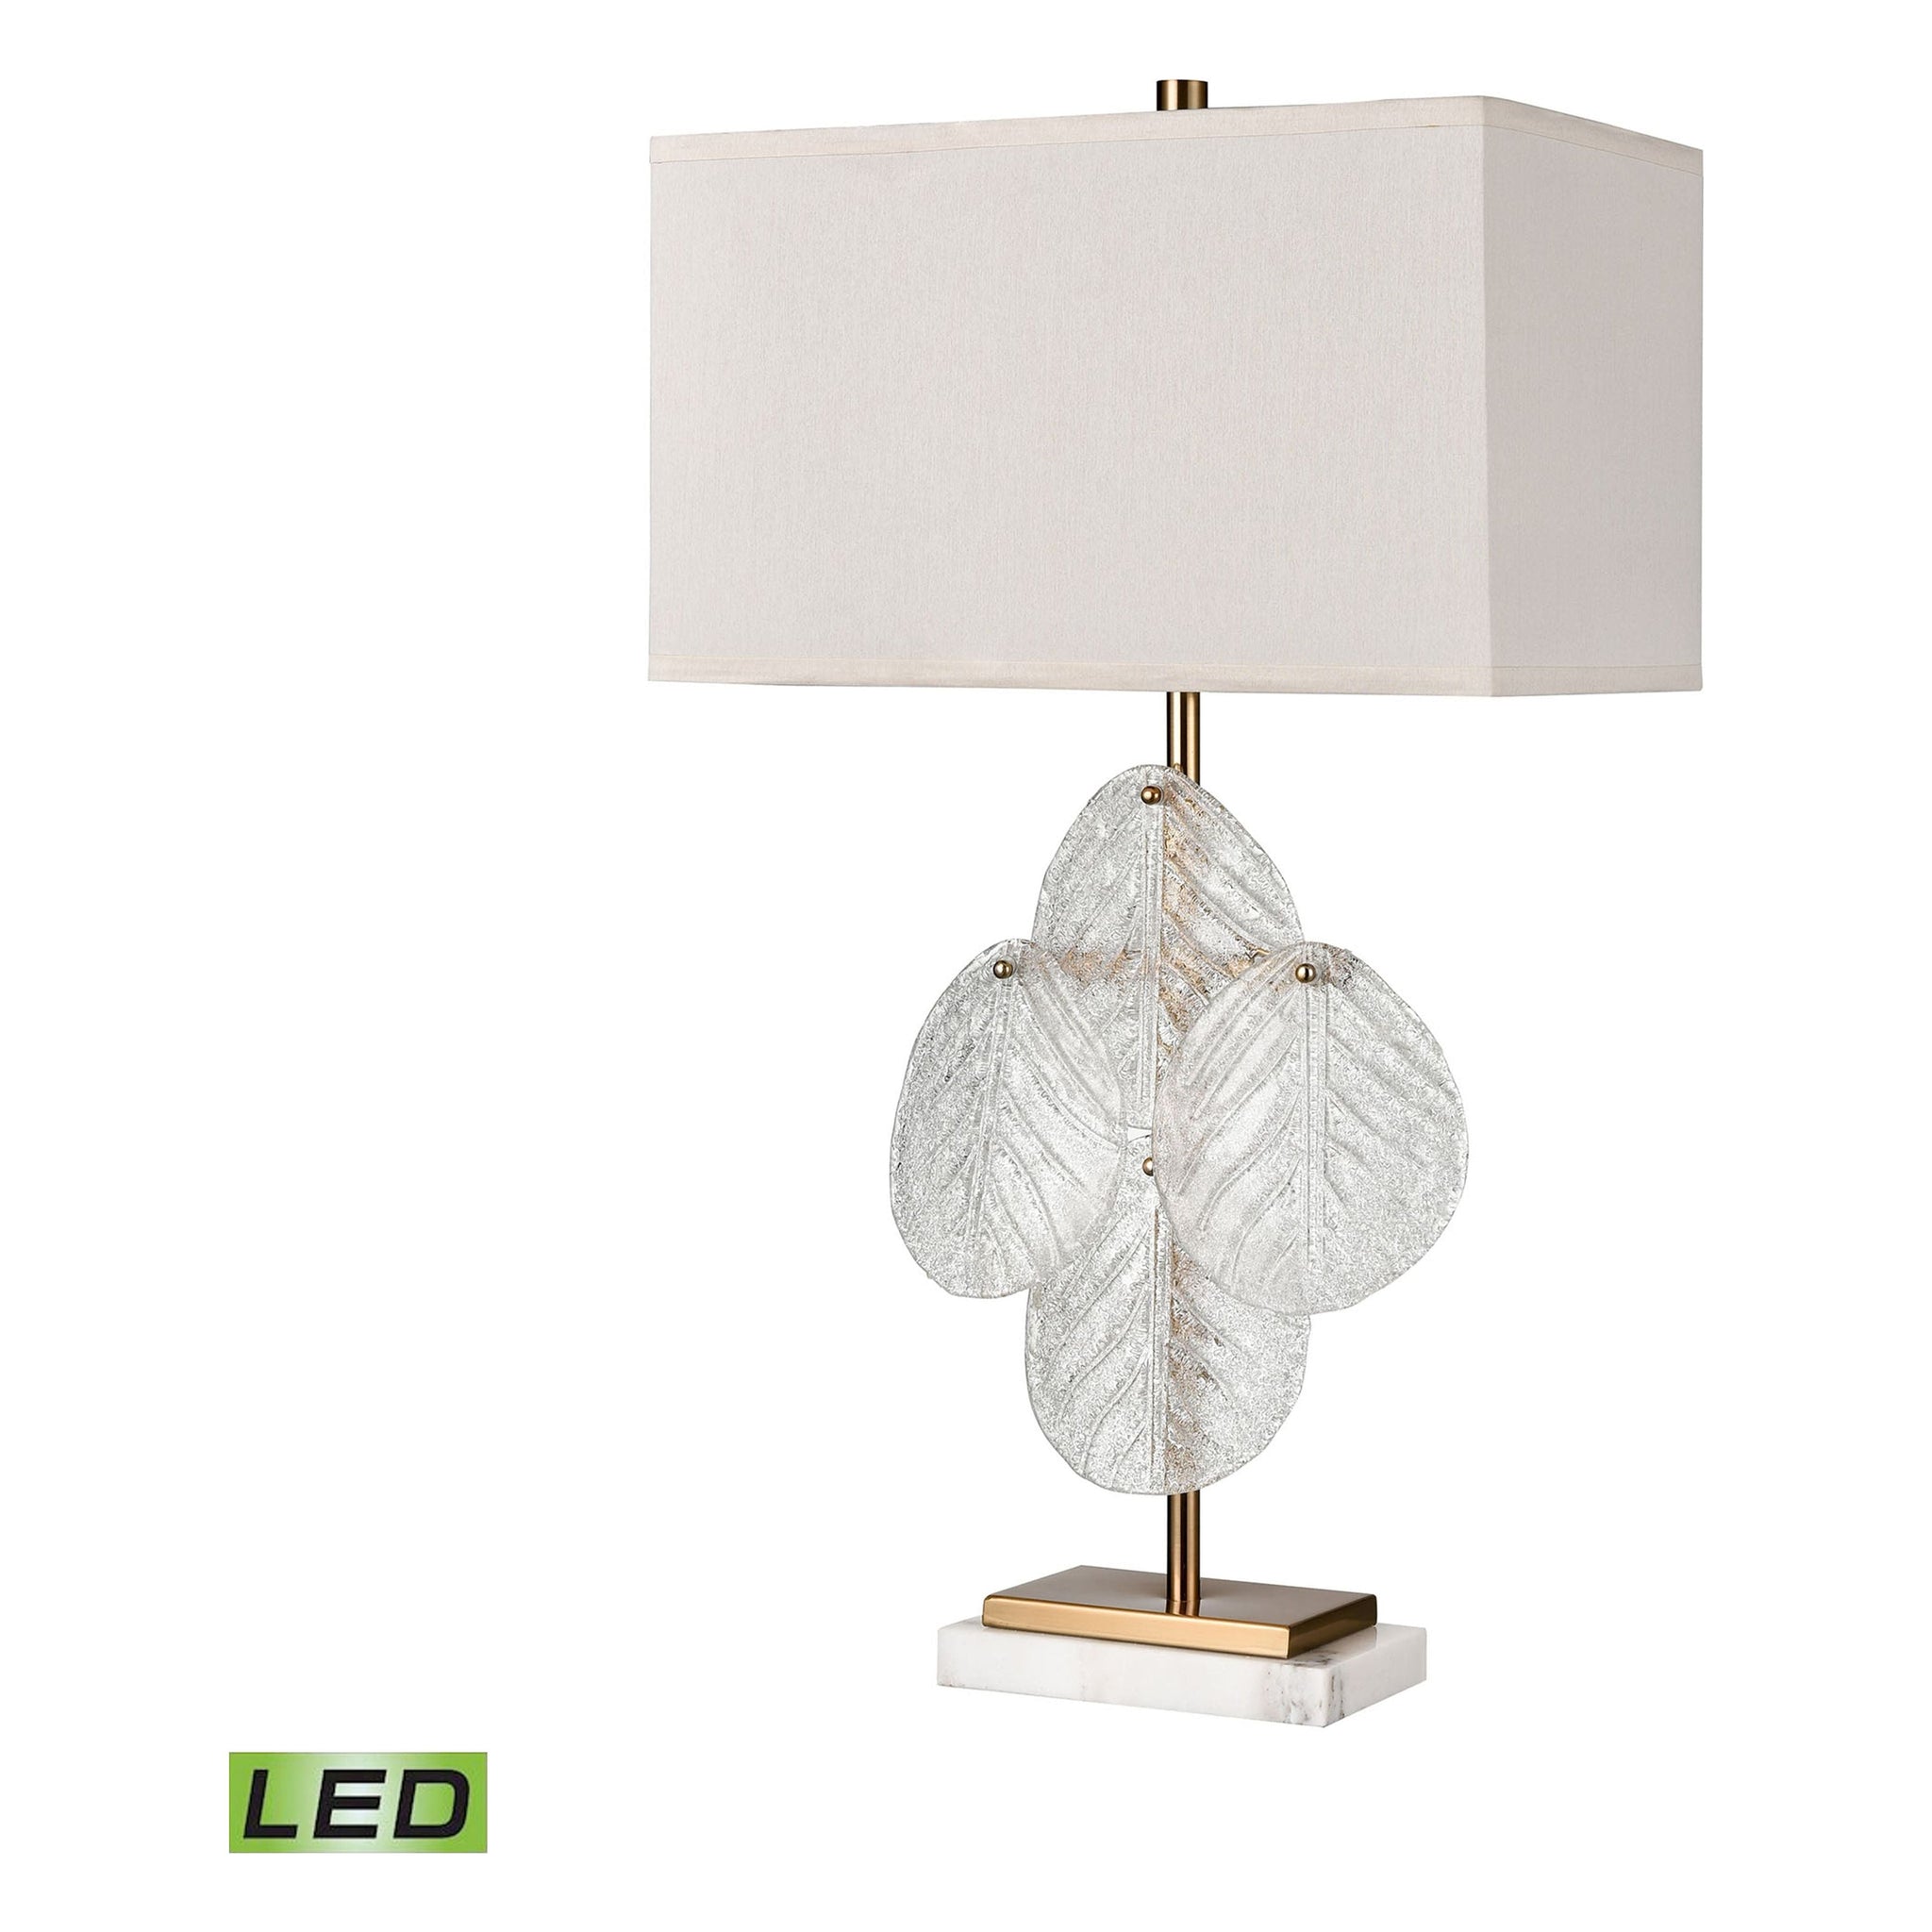 Glade 30" High 1-Light Table Lamp